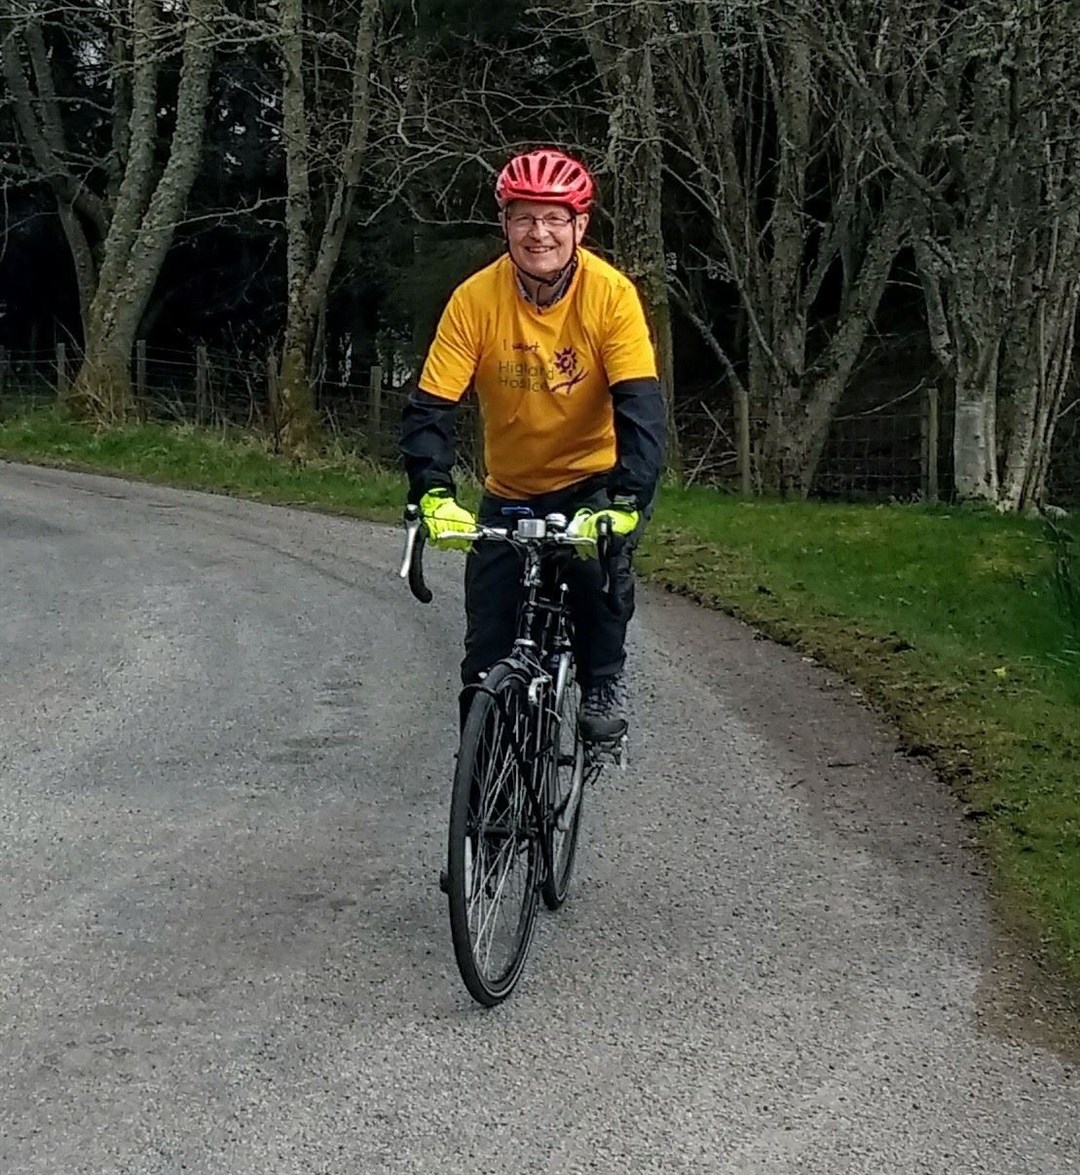 Richard Guest whose wife Jonie who died at Highland Hospice a year ago. He is tackling a 600 mile cycle ride this month in her memory.